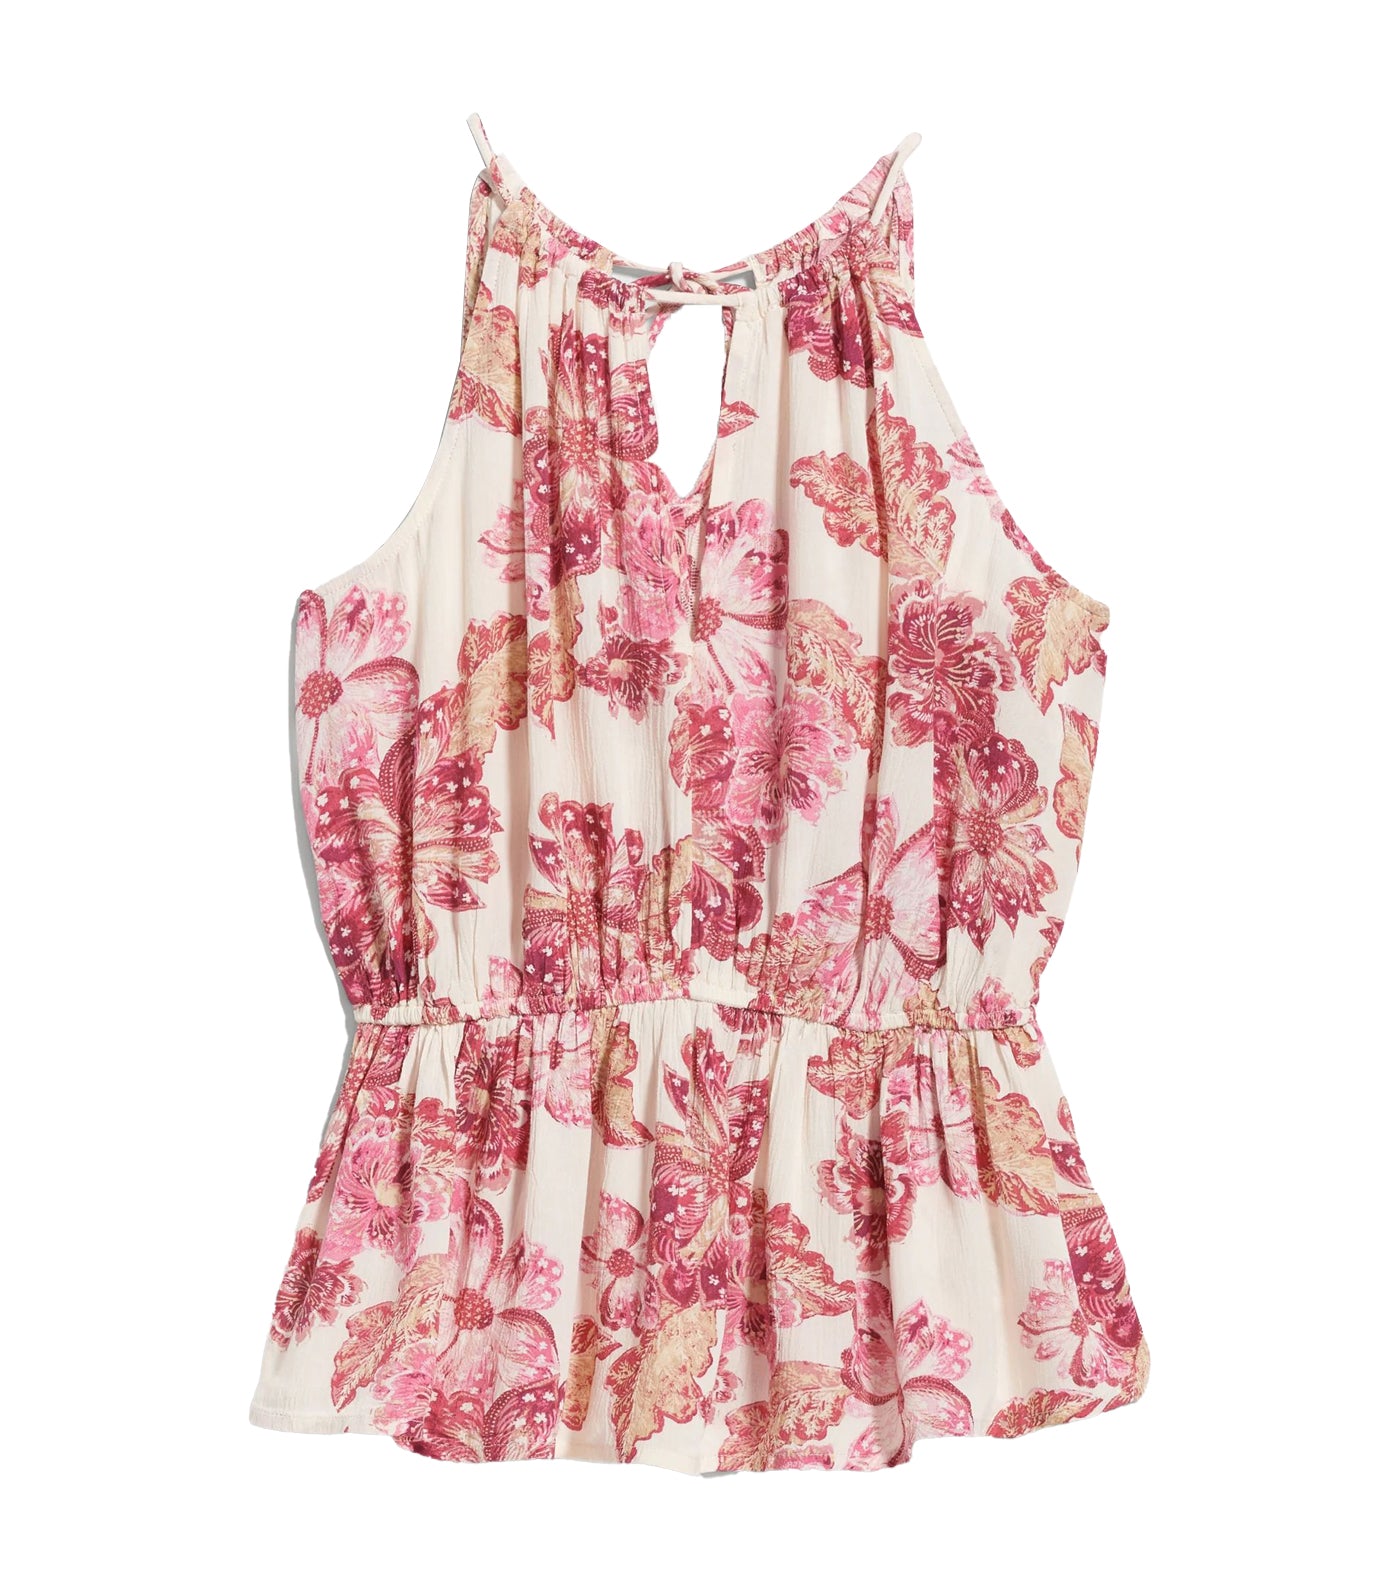 Sleeveless High-Neck Top for Women Pink Floral